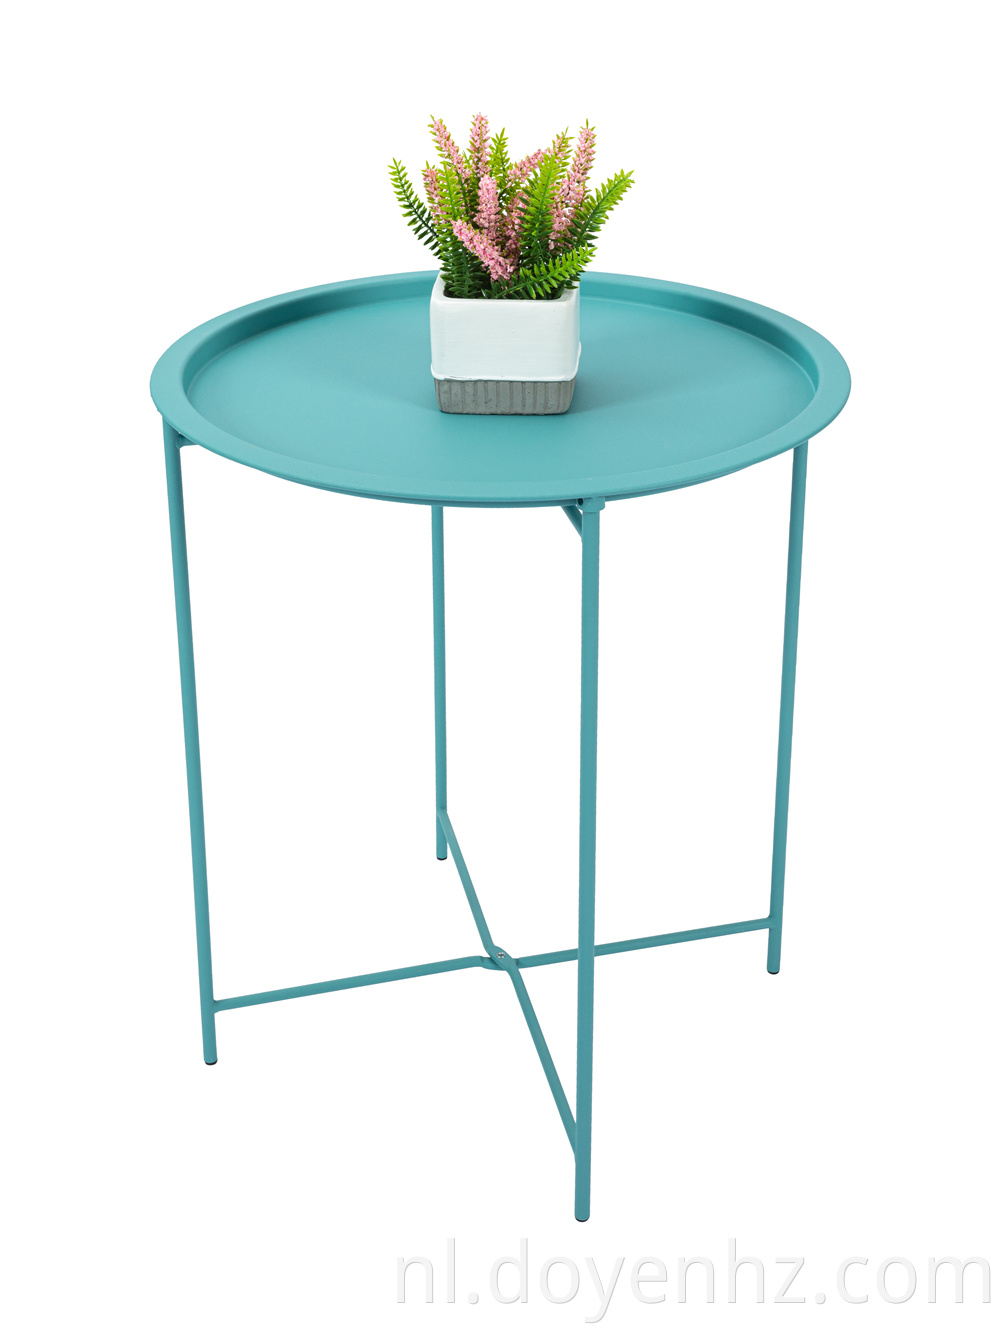 Metal Folding Round Side Table